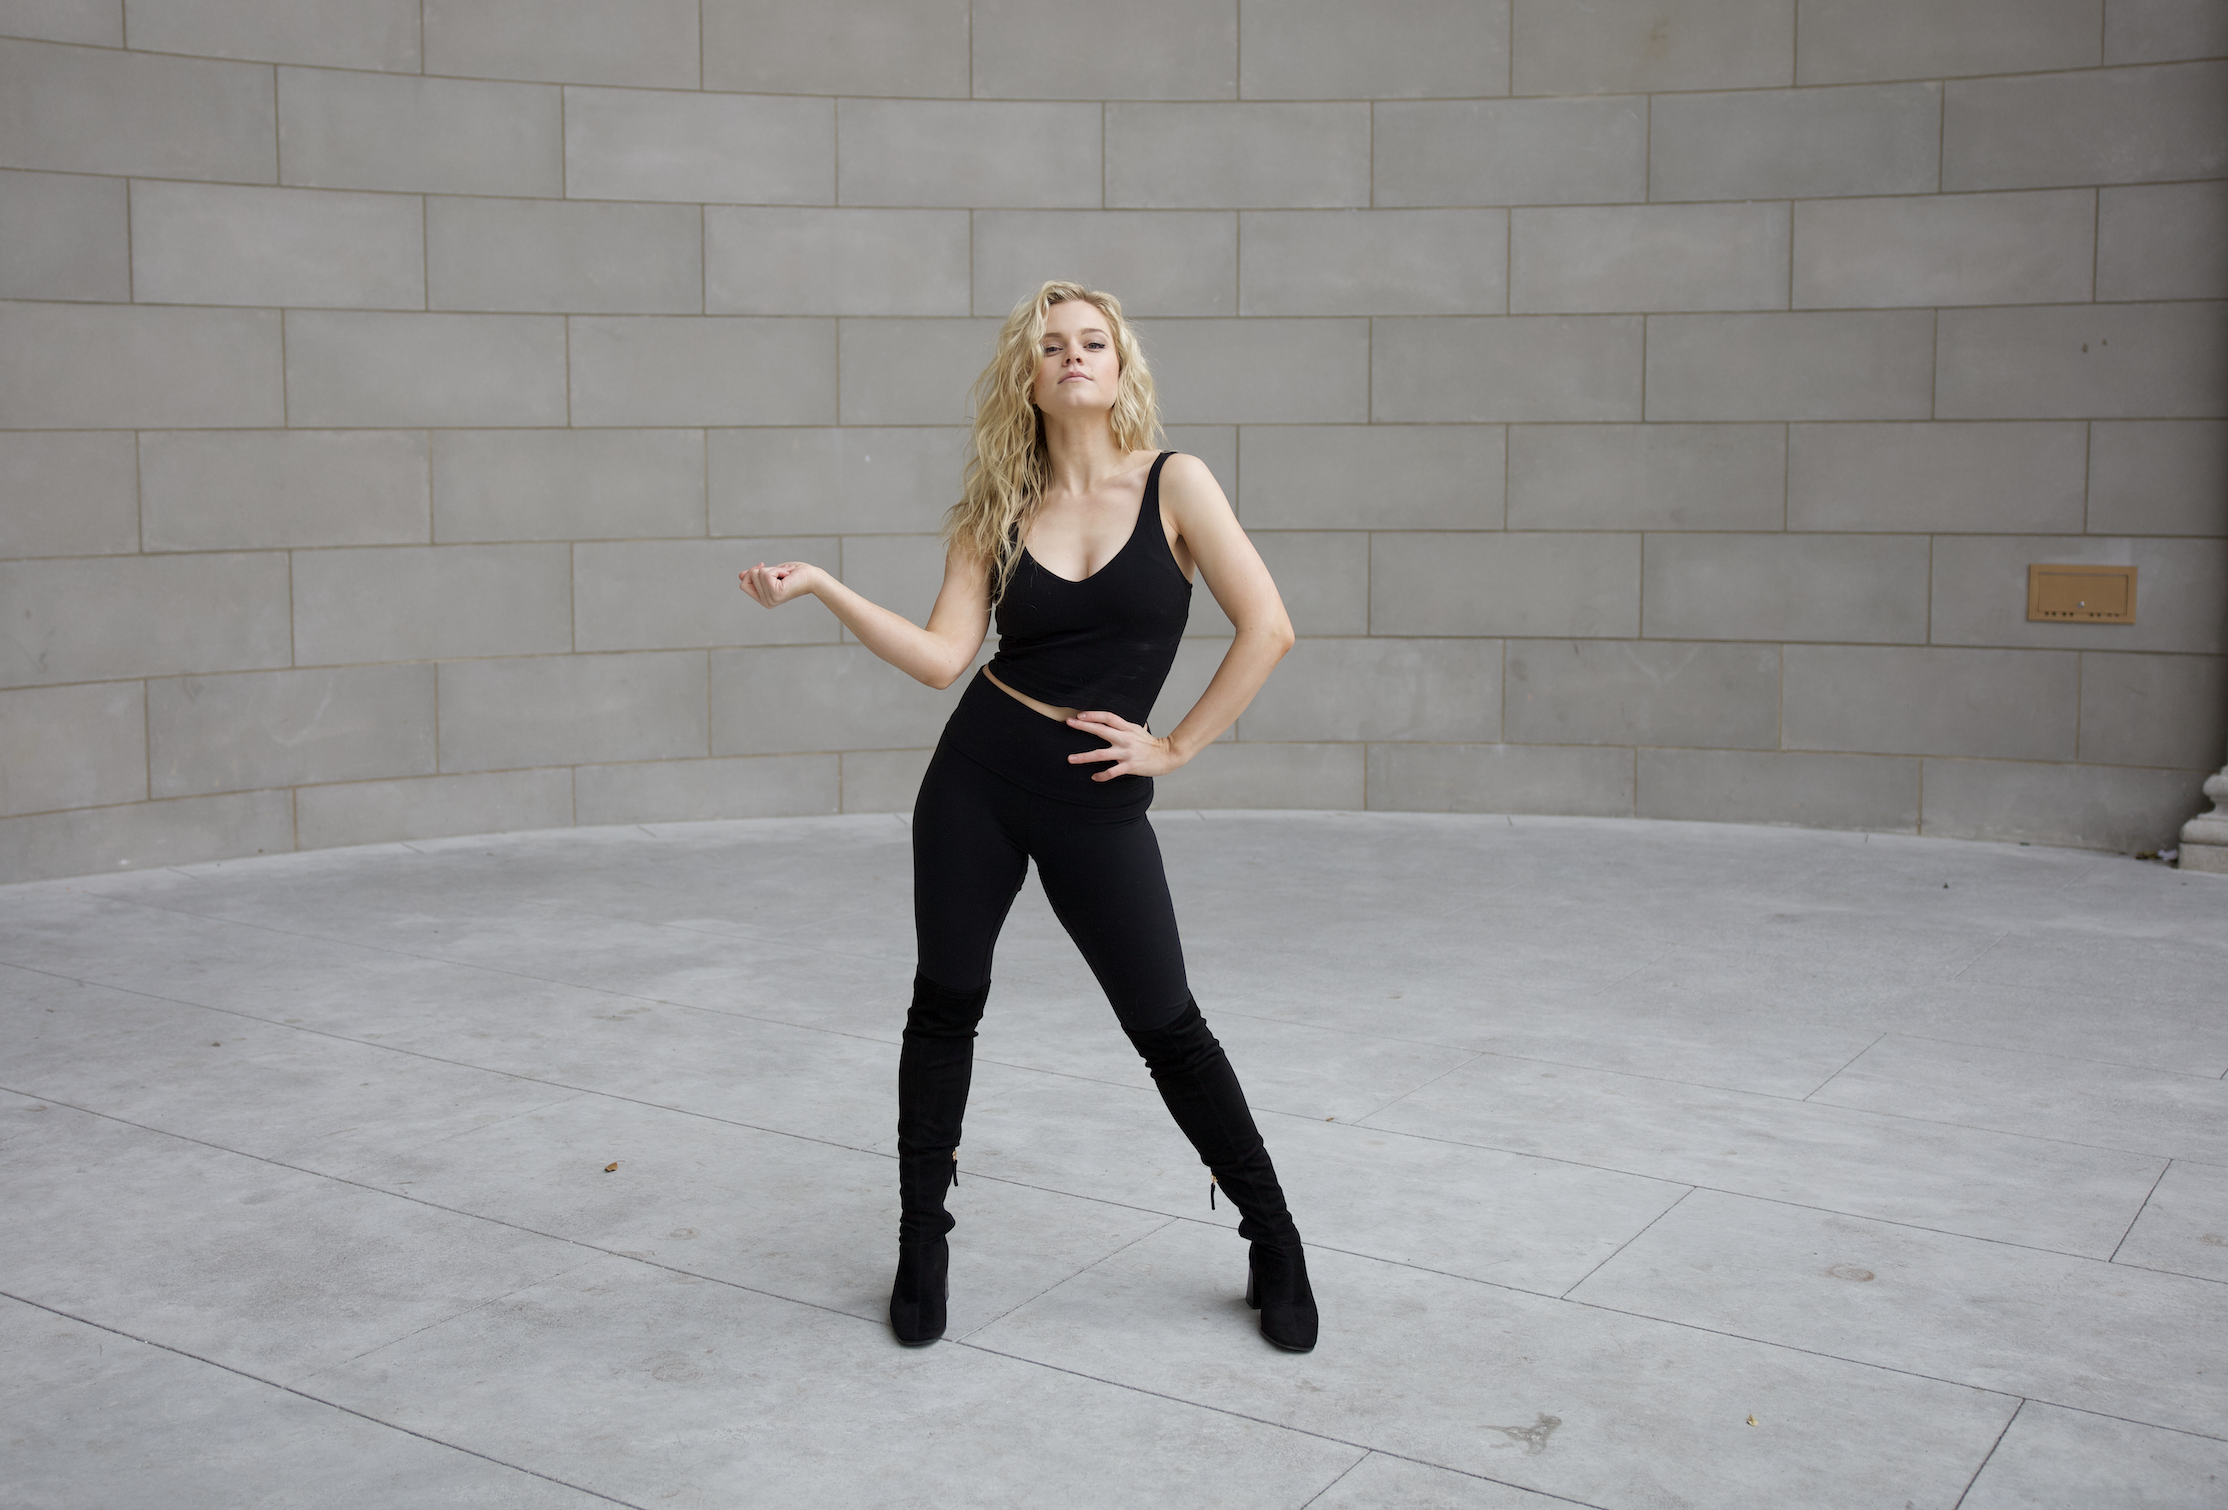 A blond woman stands with one hand on her hip, the other snapping to the side, in balck against a stone background